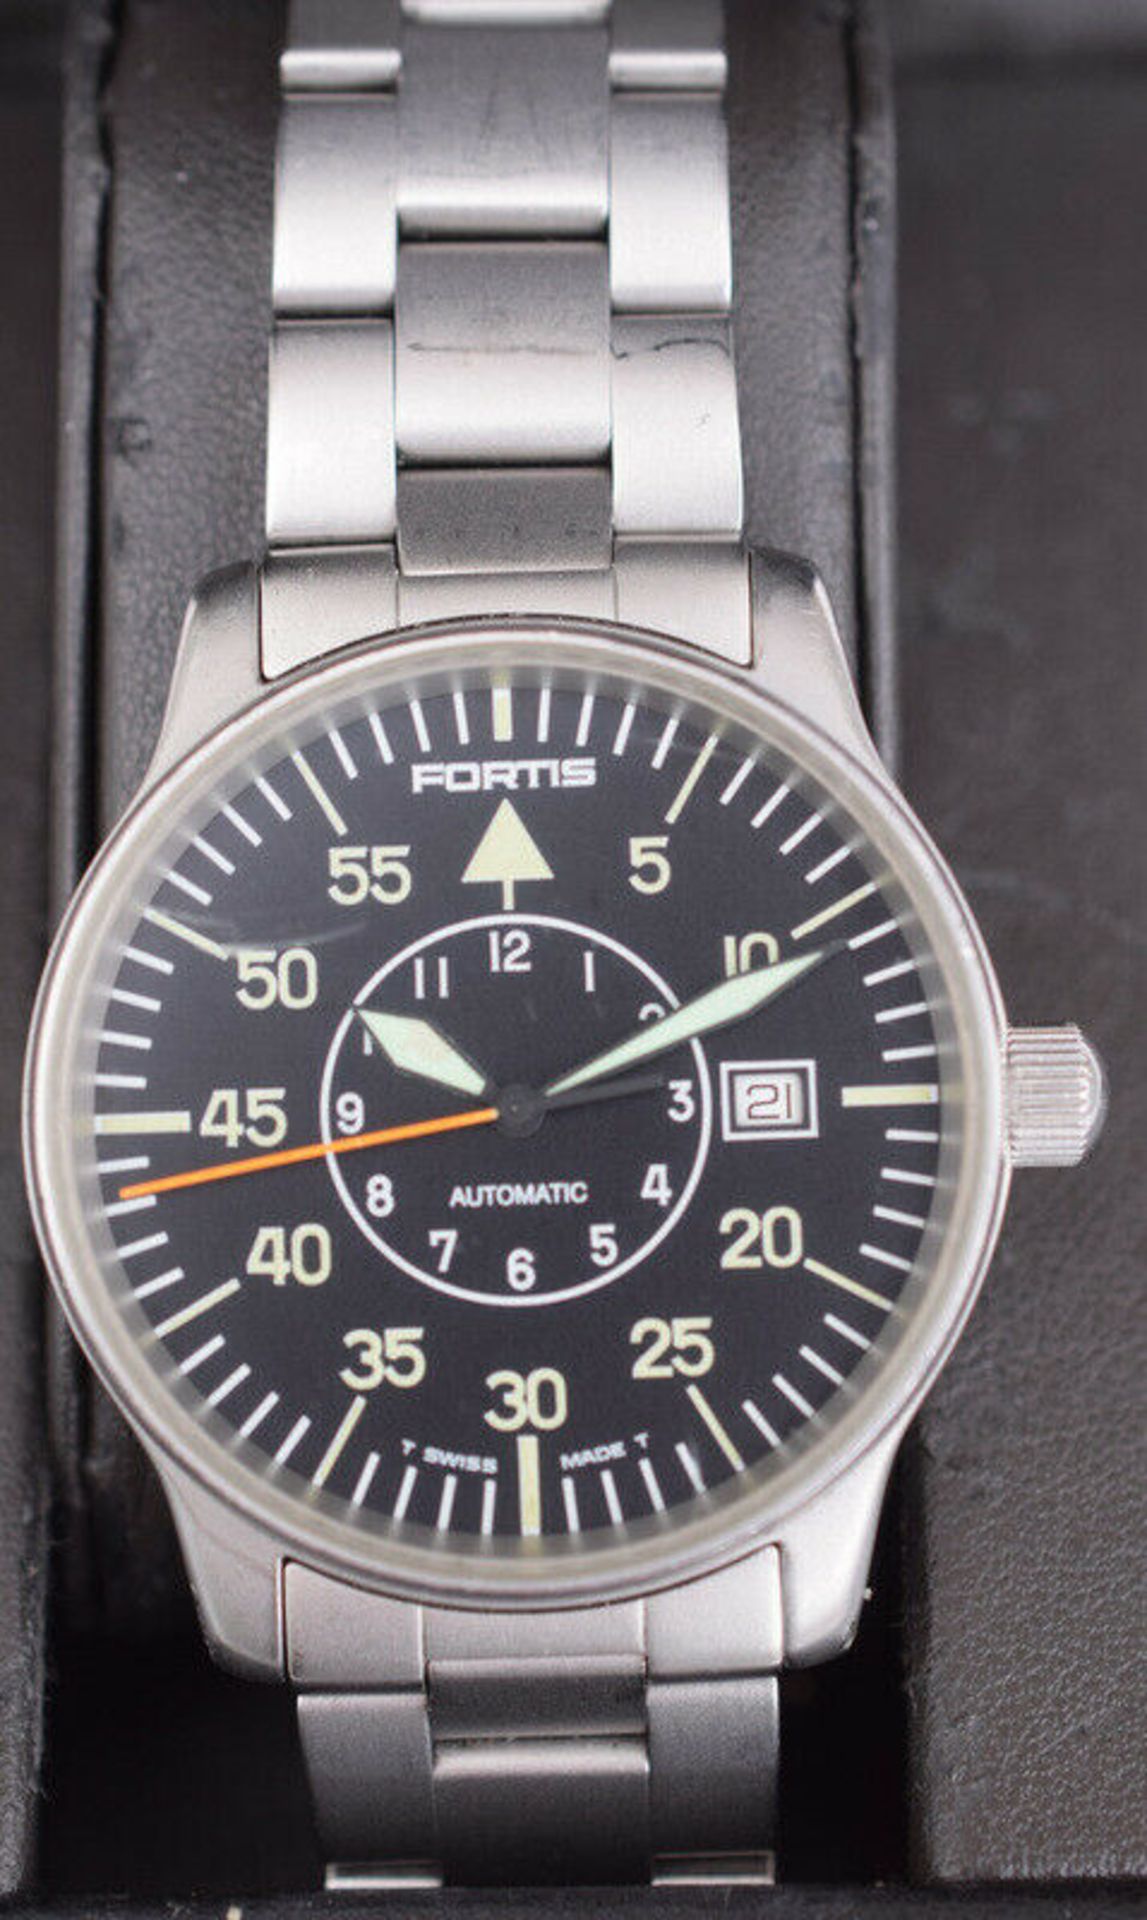 Vintage Fortis Flieger Automatic 595.10.46 Pilot's Watch Full Set - Image 5 of 9